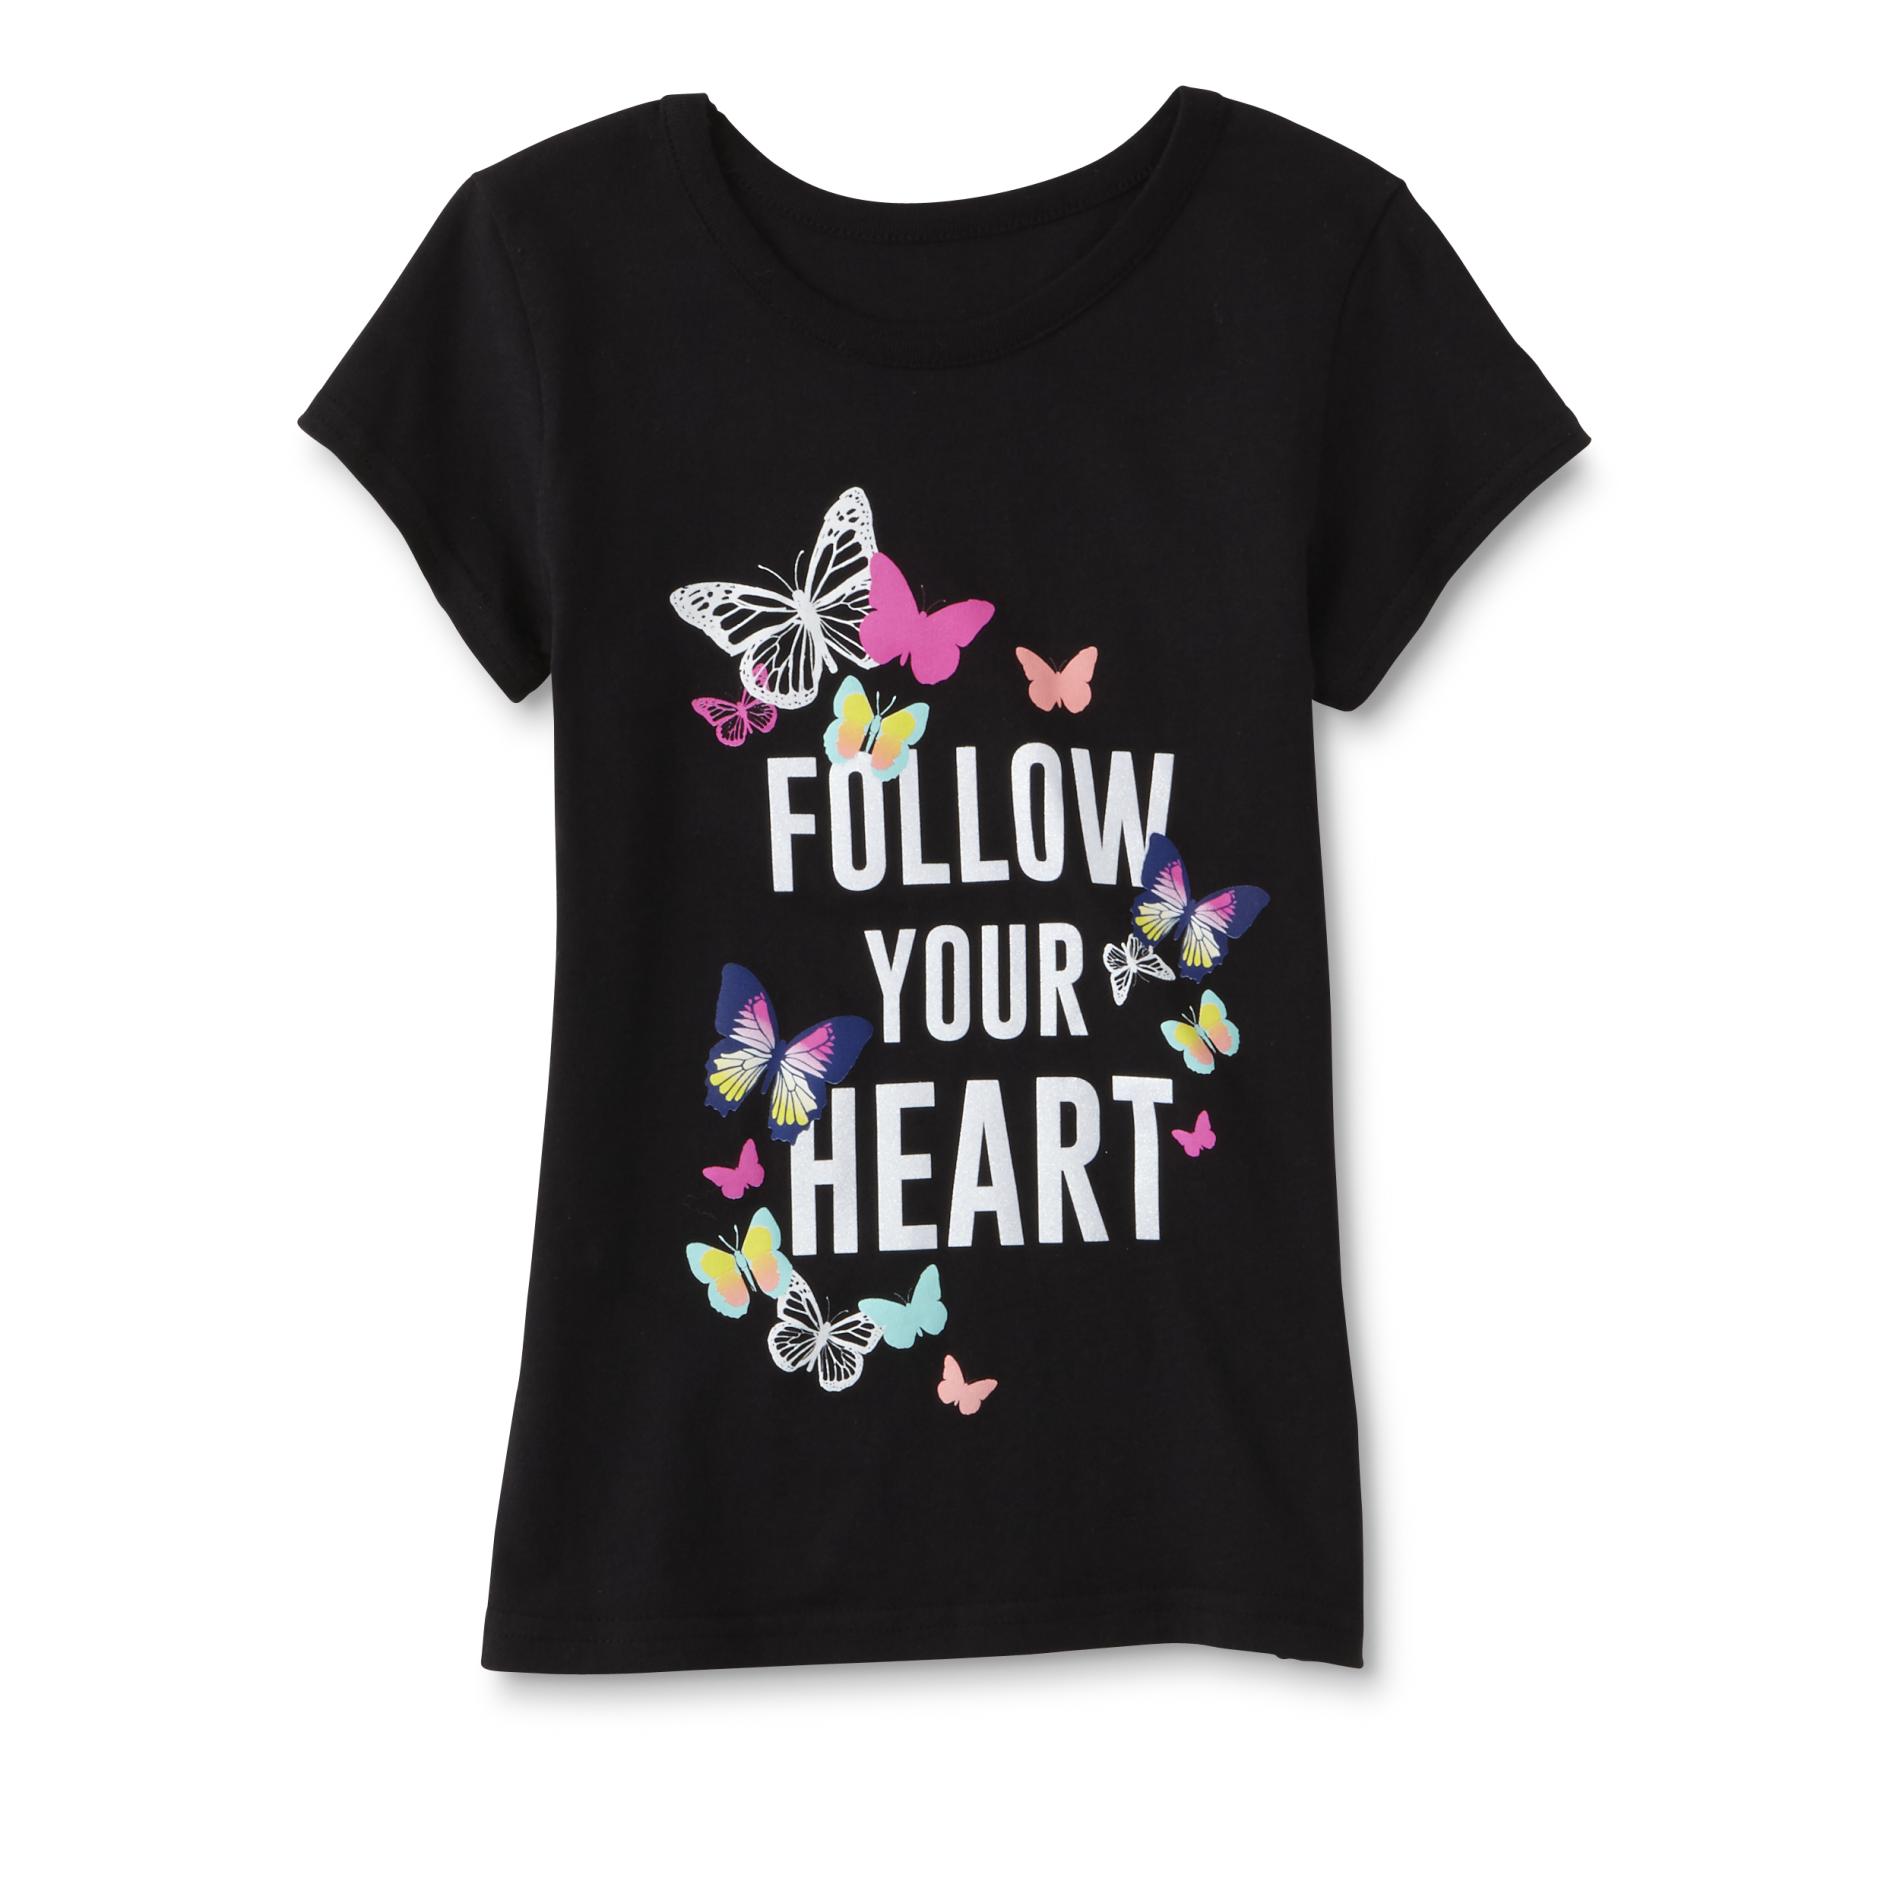 Route 66 Girl's Graphic T-Shirt - Follow Your Heart